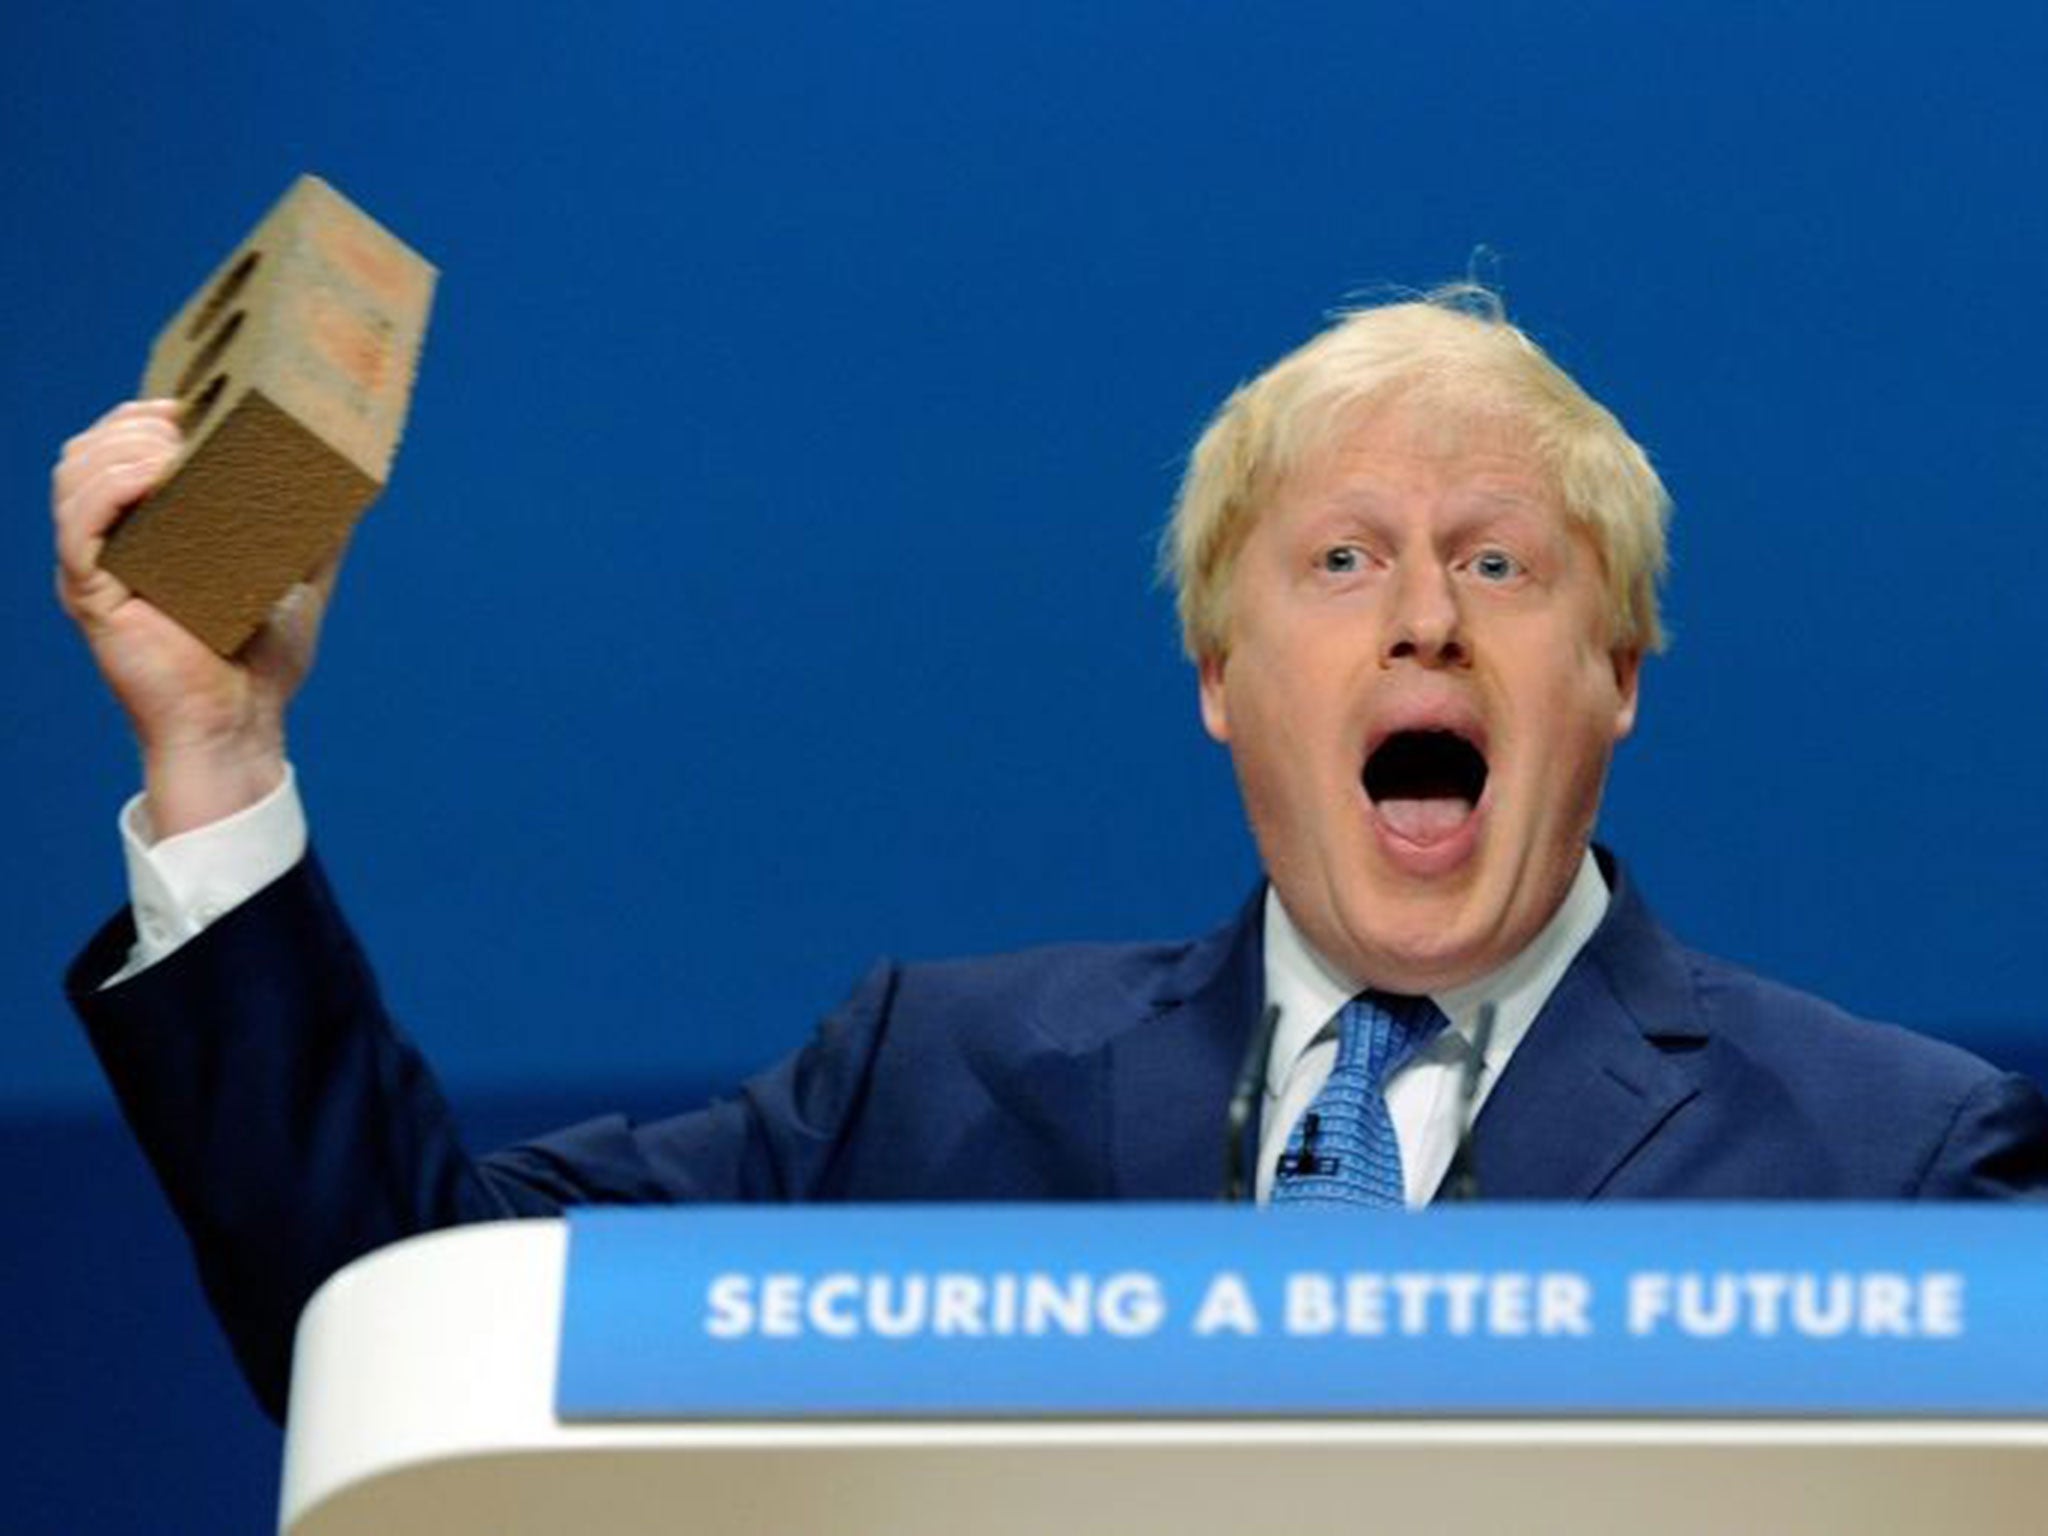 Boris Johnson's speech at the Conservative Party conference